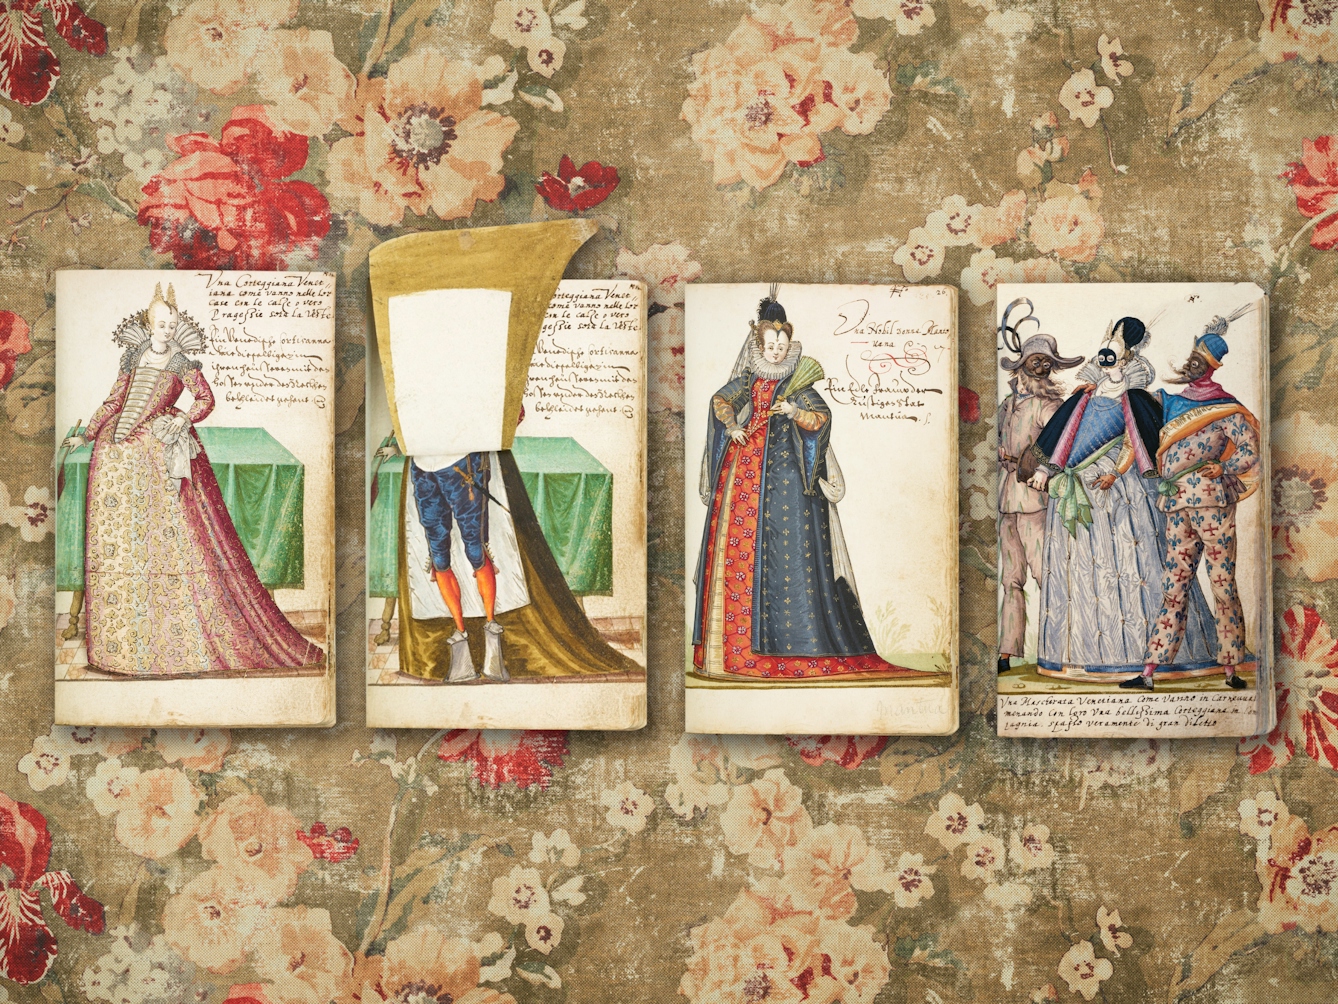 Digital composite image showing a floral renaissance worn fabric background. Resting on top of the background are 4 small hand drawn and coloured picture. Each one shows a full length portrait of a woman. Each woman is wearing different clothes and hats from the 16th century. In the image second from the left a flap on the print has been raised to reveal the woman's undergarments and chopin shoes.